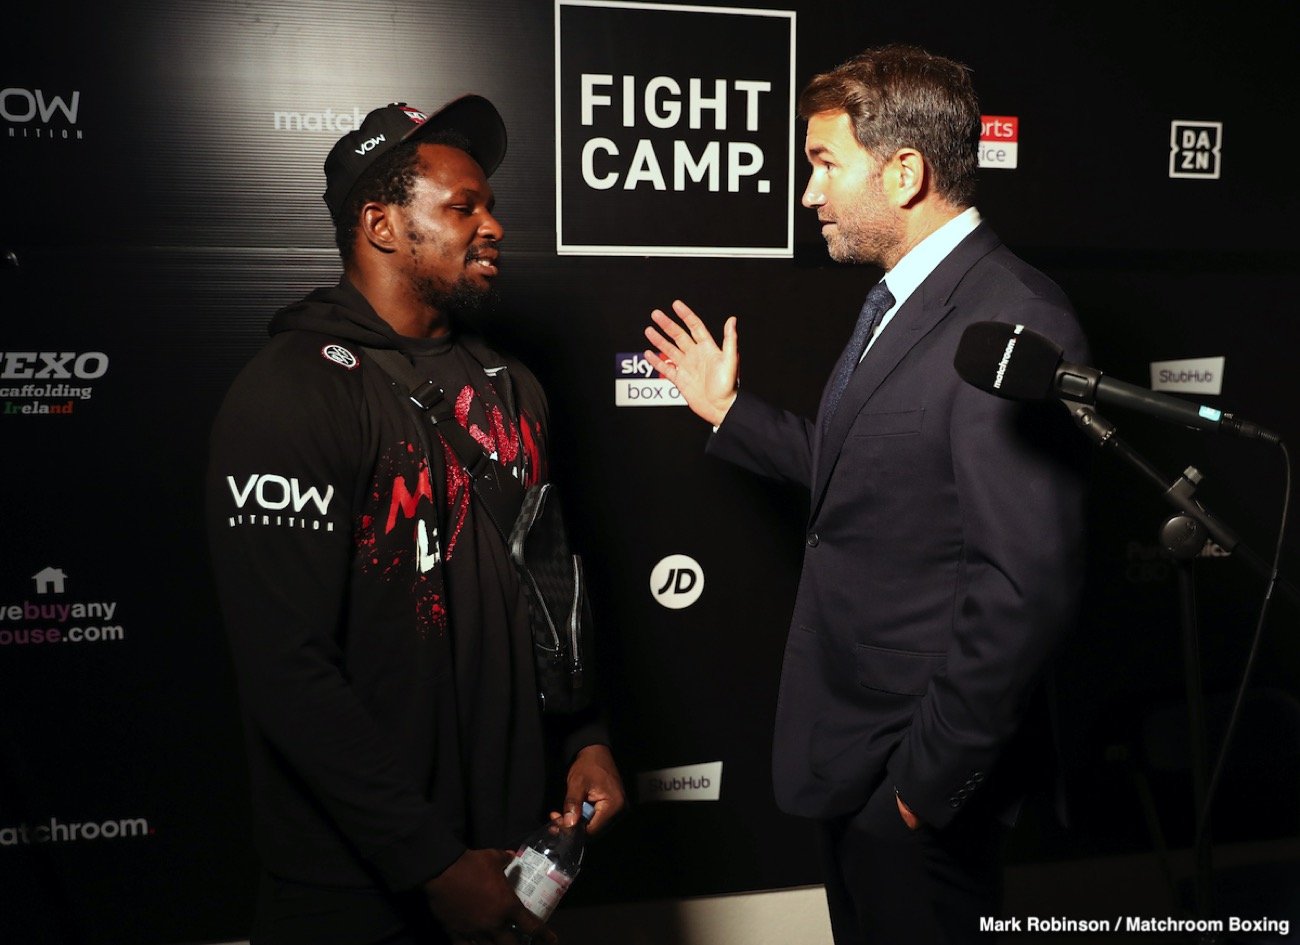 Image: Povetkin not ready, Whyte could face someone else